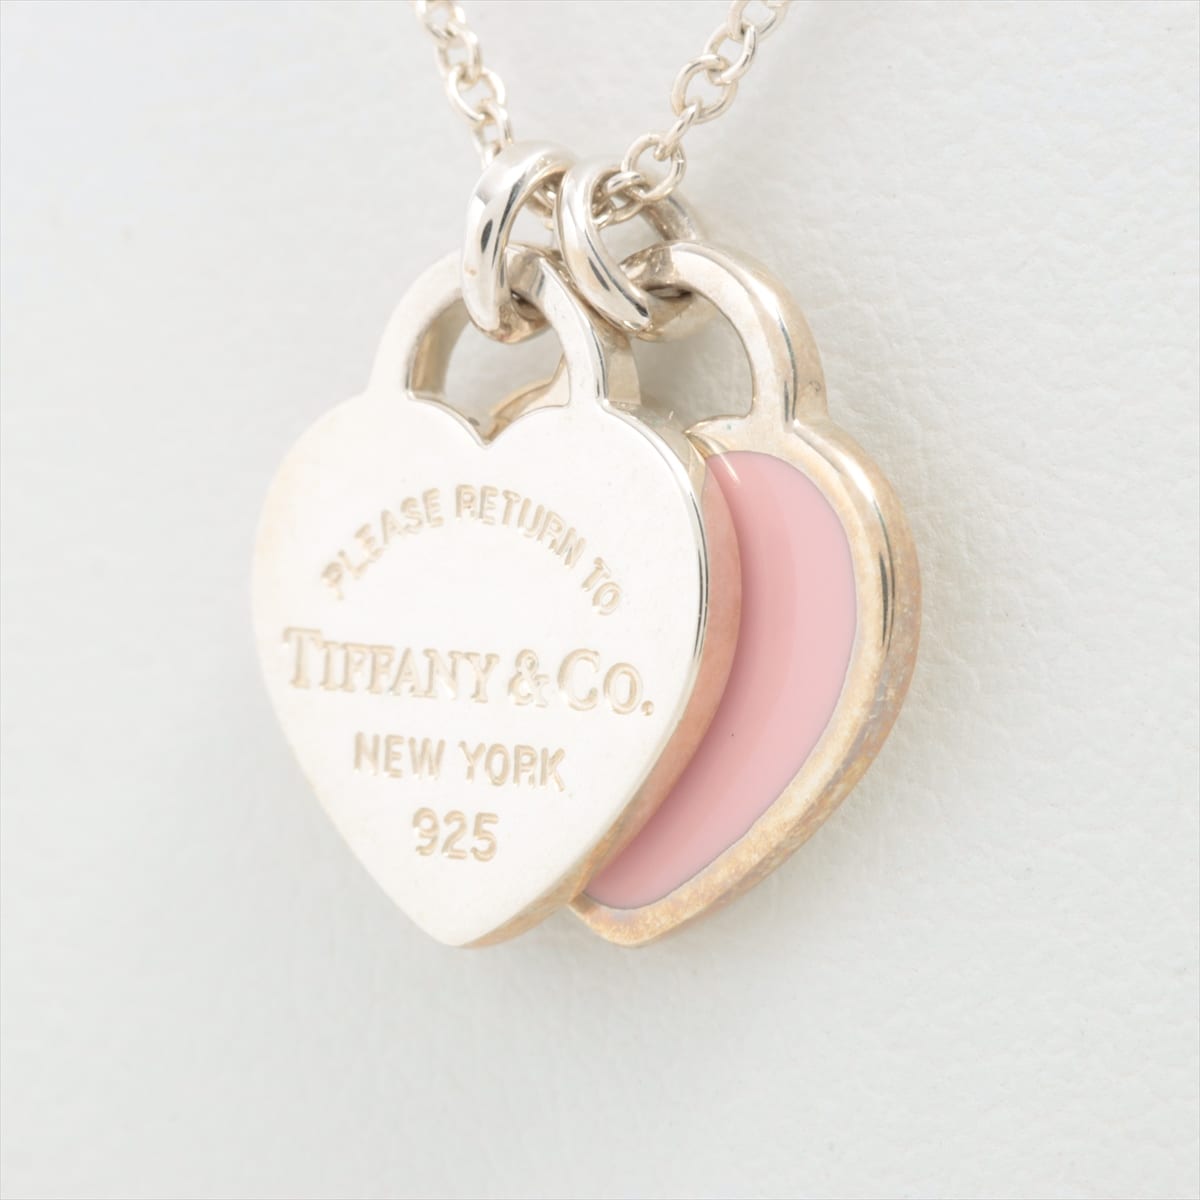 Tiffany Return To Tiffany Mini Double Heart Tag Necklace 925 2.6g Silver×Pink